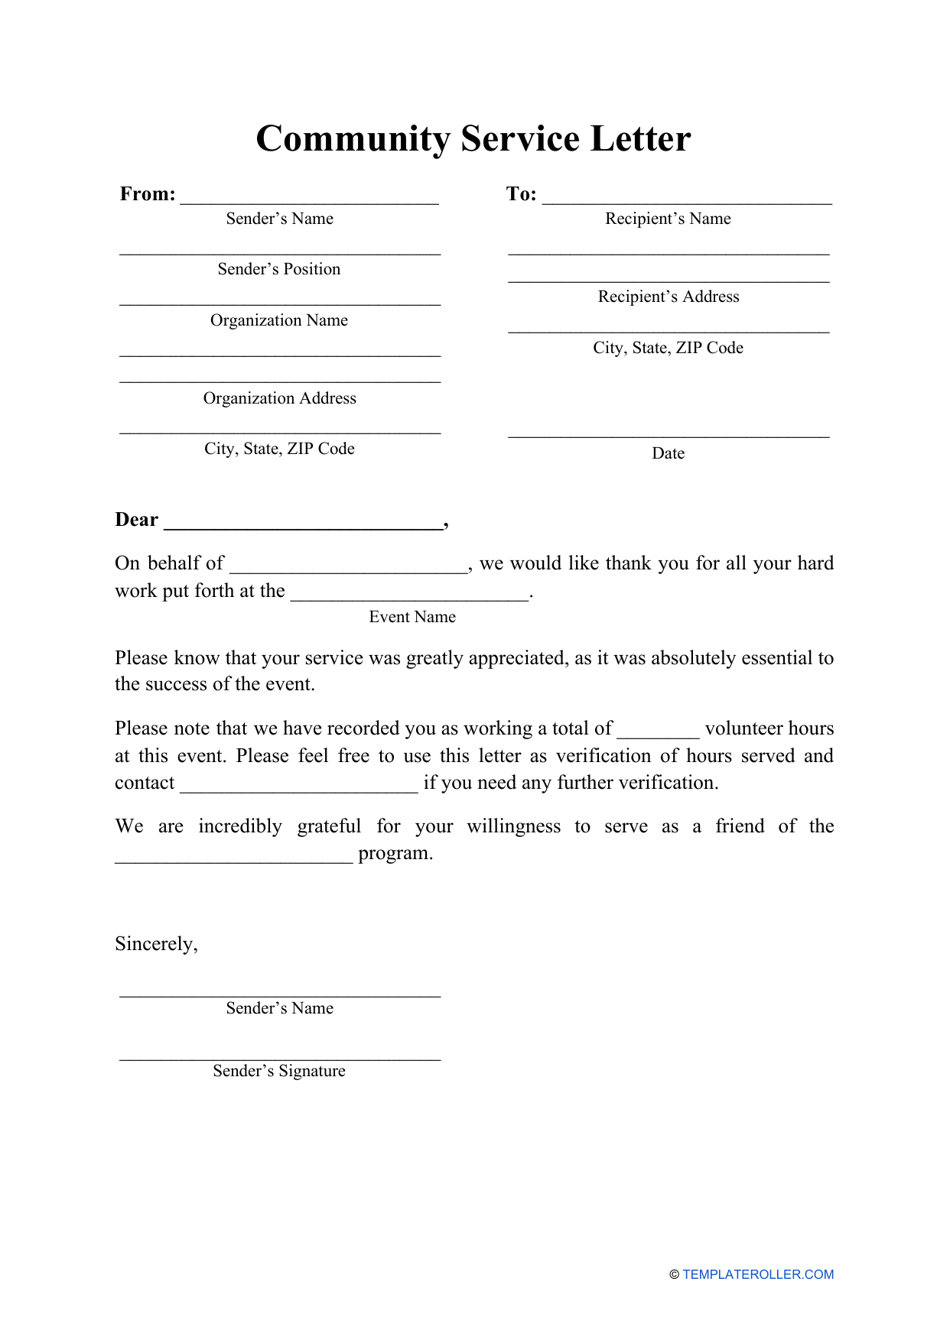 A visually appealing community service letter template